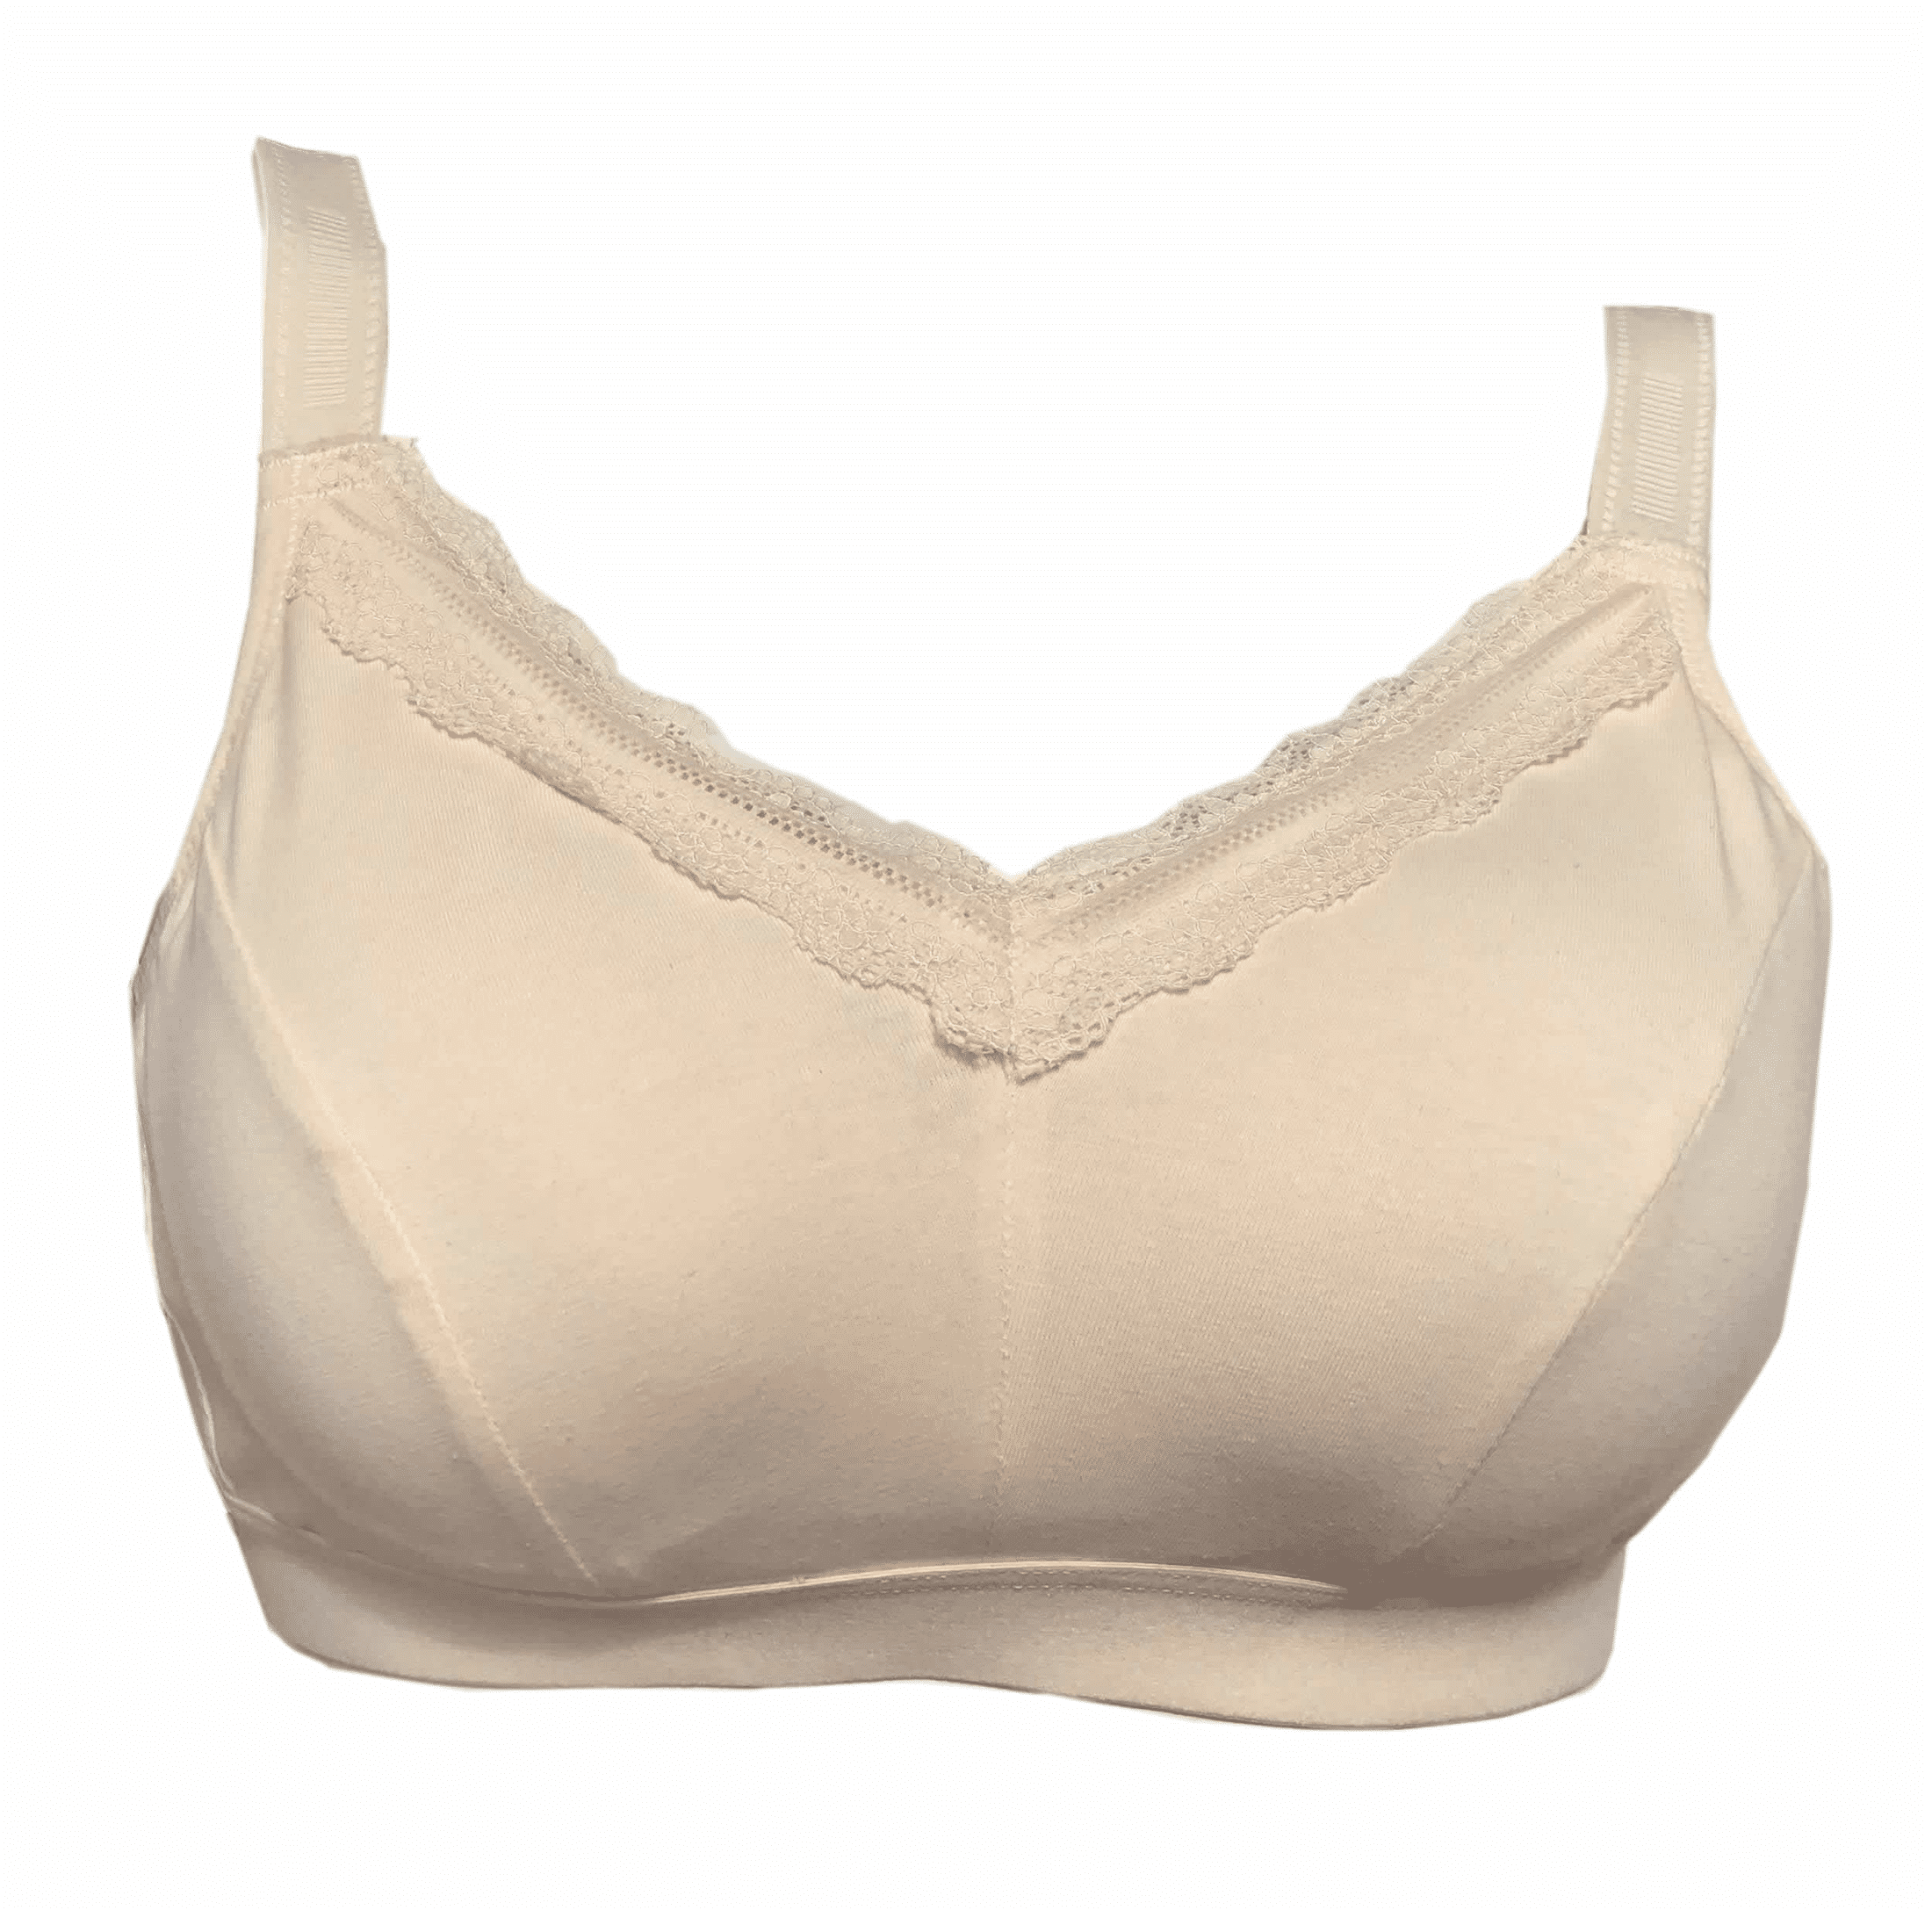 BIMEI Mastectomy Bra with Pockets for Breast Prosthesis Women's Full  Coverage Wirefree Everyday Bra plus size 8102,Pink,42A 